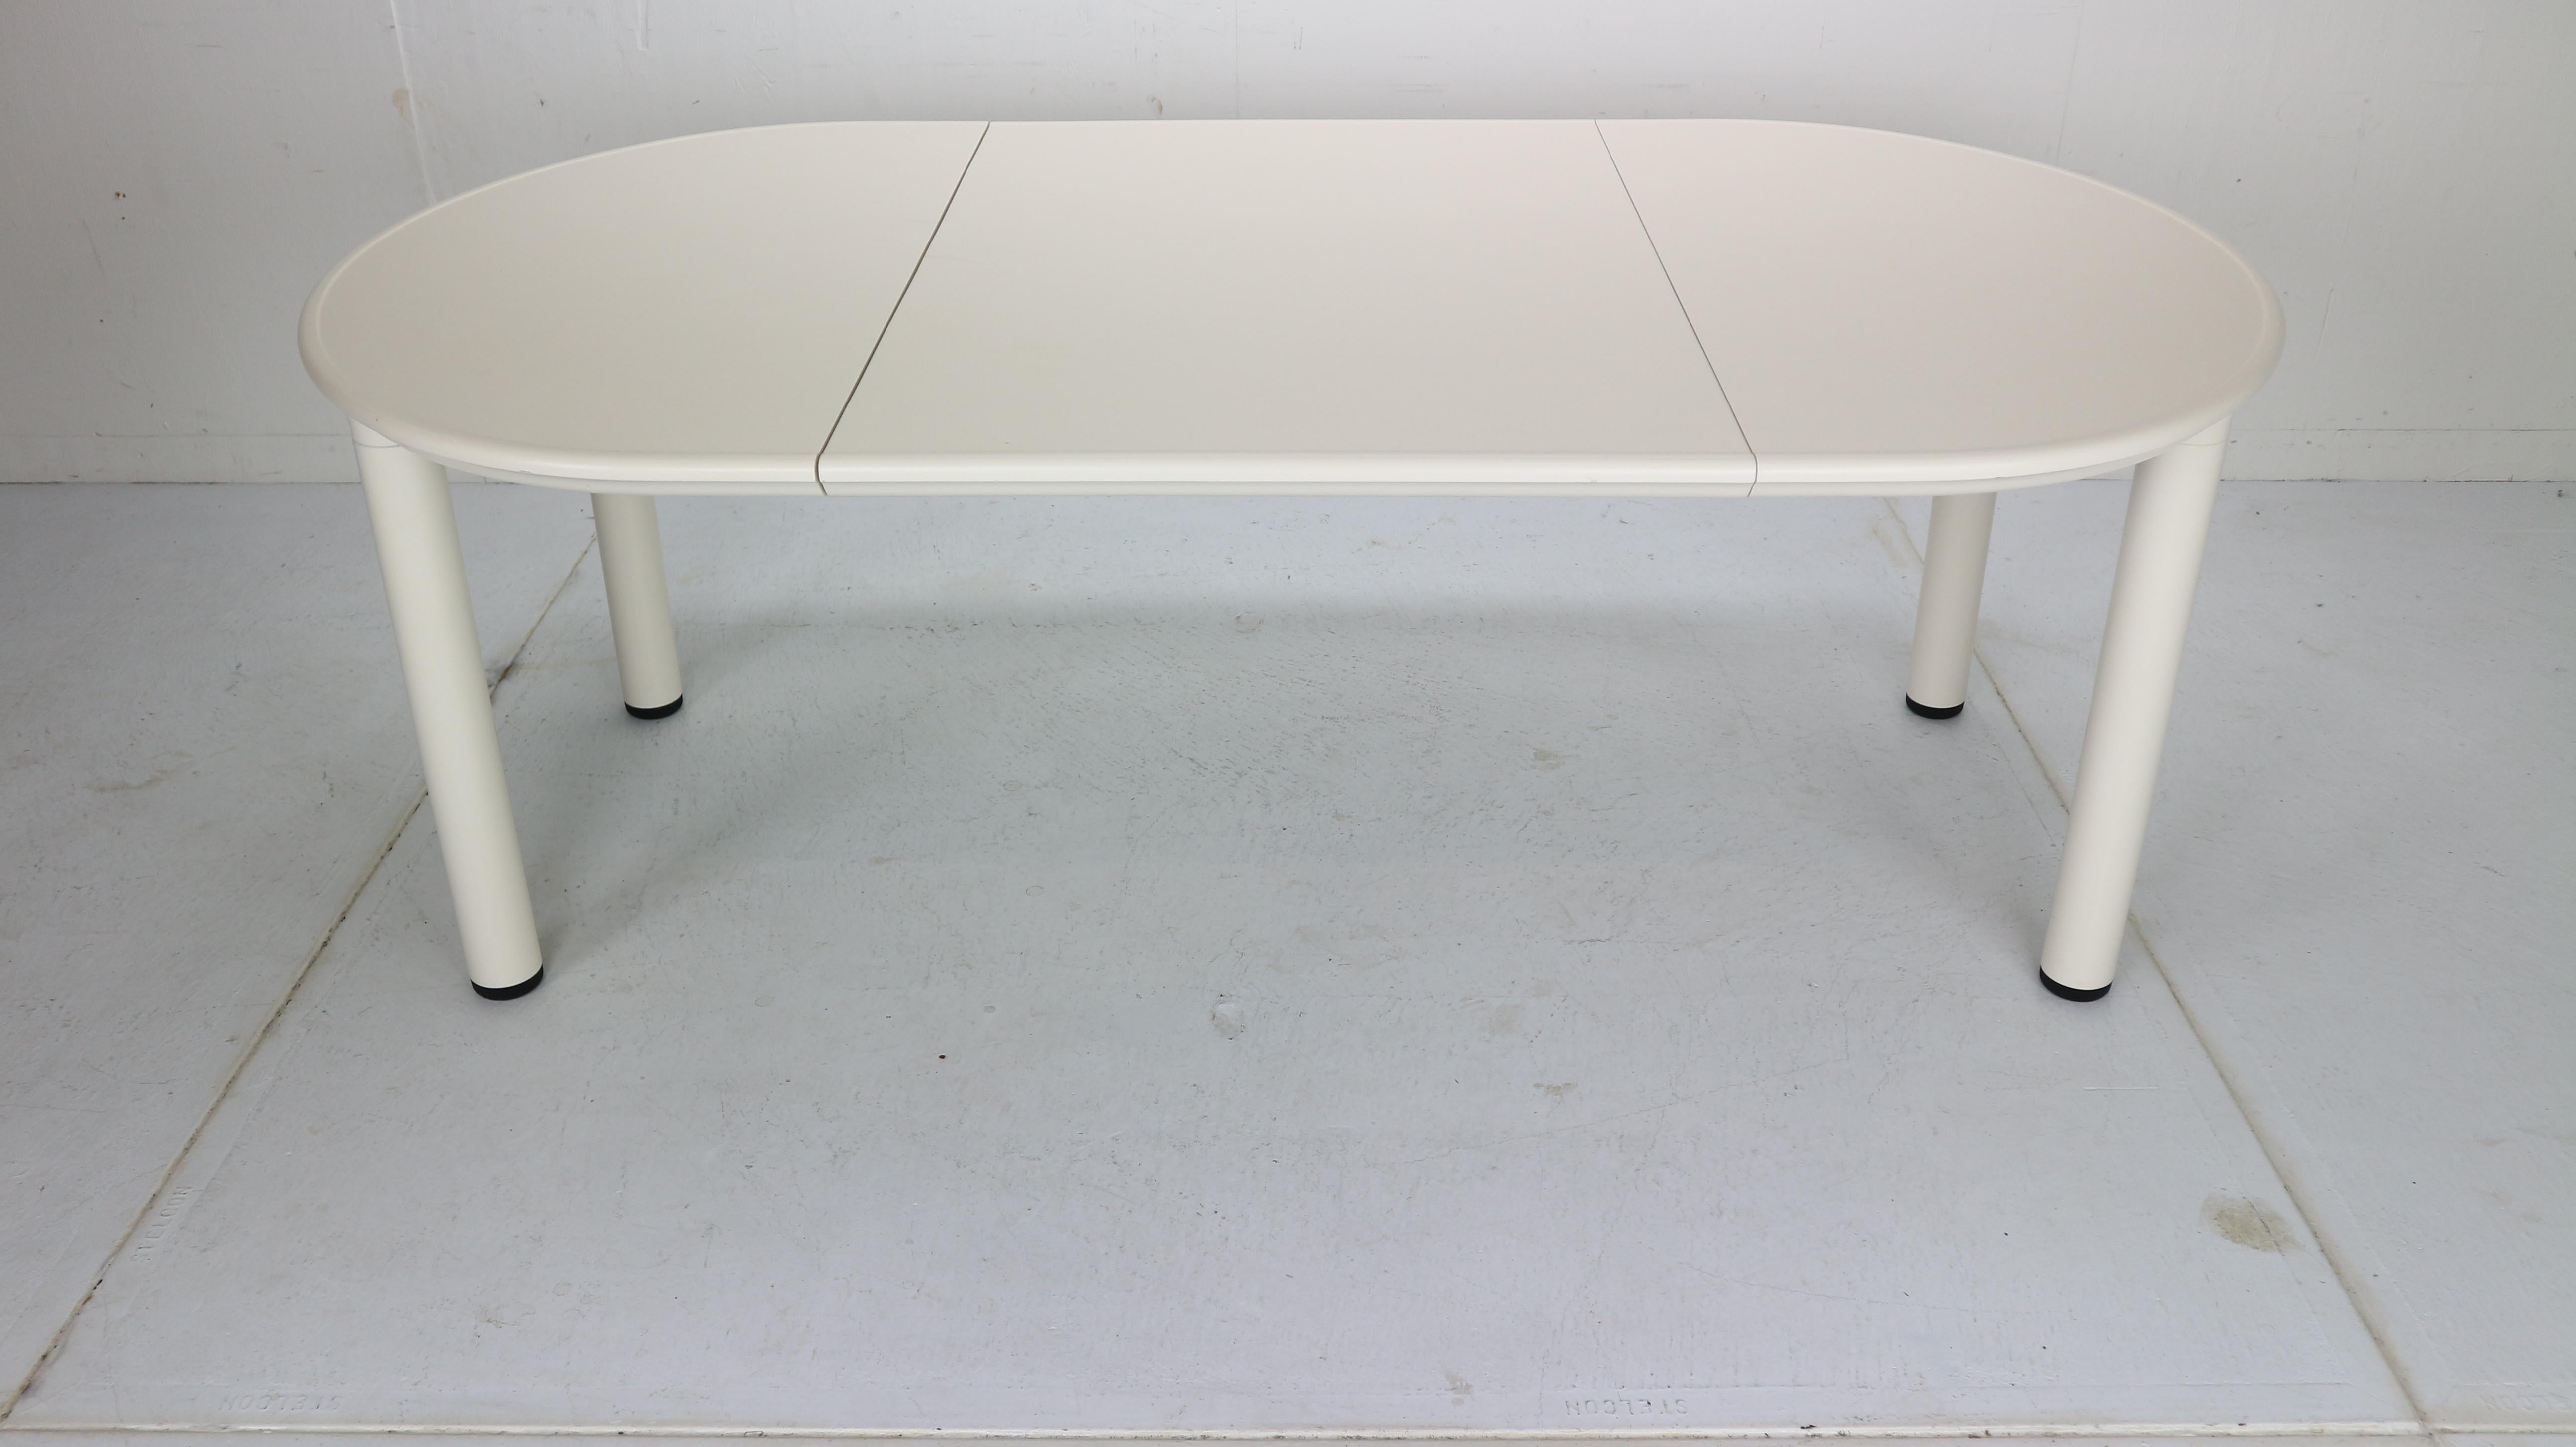 Very rare extendable dinning/ conference table by famous German furniture designer Dieter Rams and manufactured for Vitsoe in 1972.
Model number- 720, original mark on the bottom of the table.
Easily extendable from round table to an oval shape